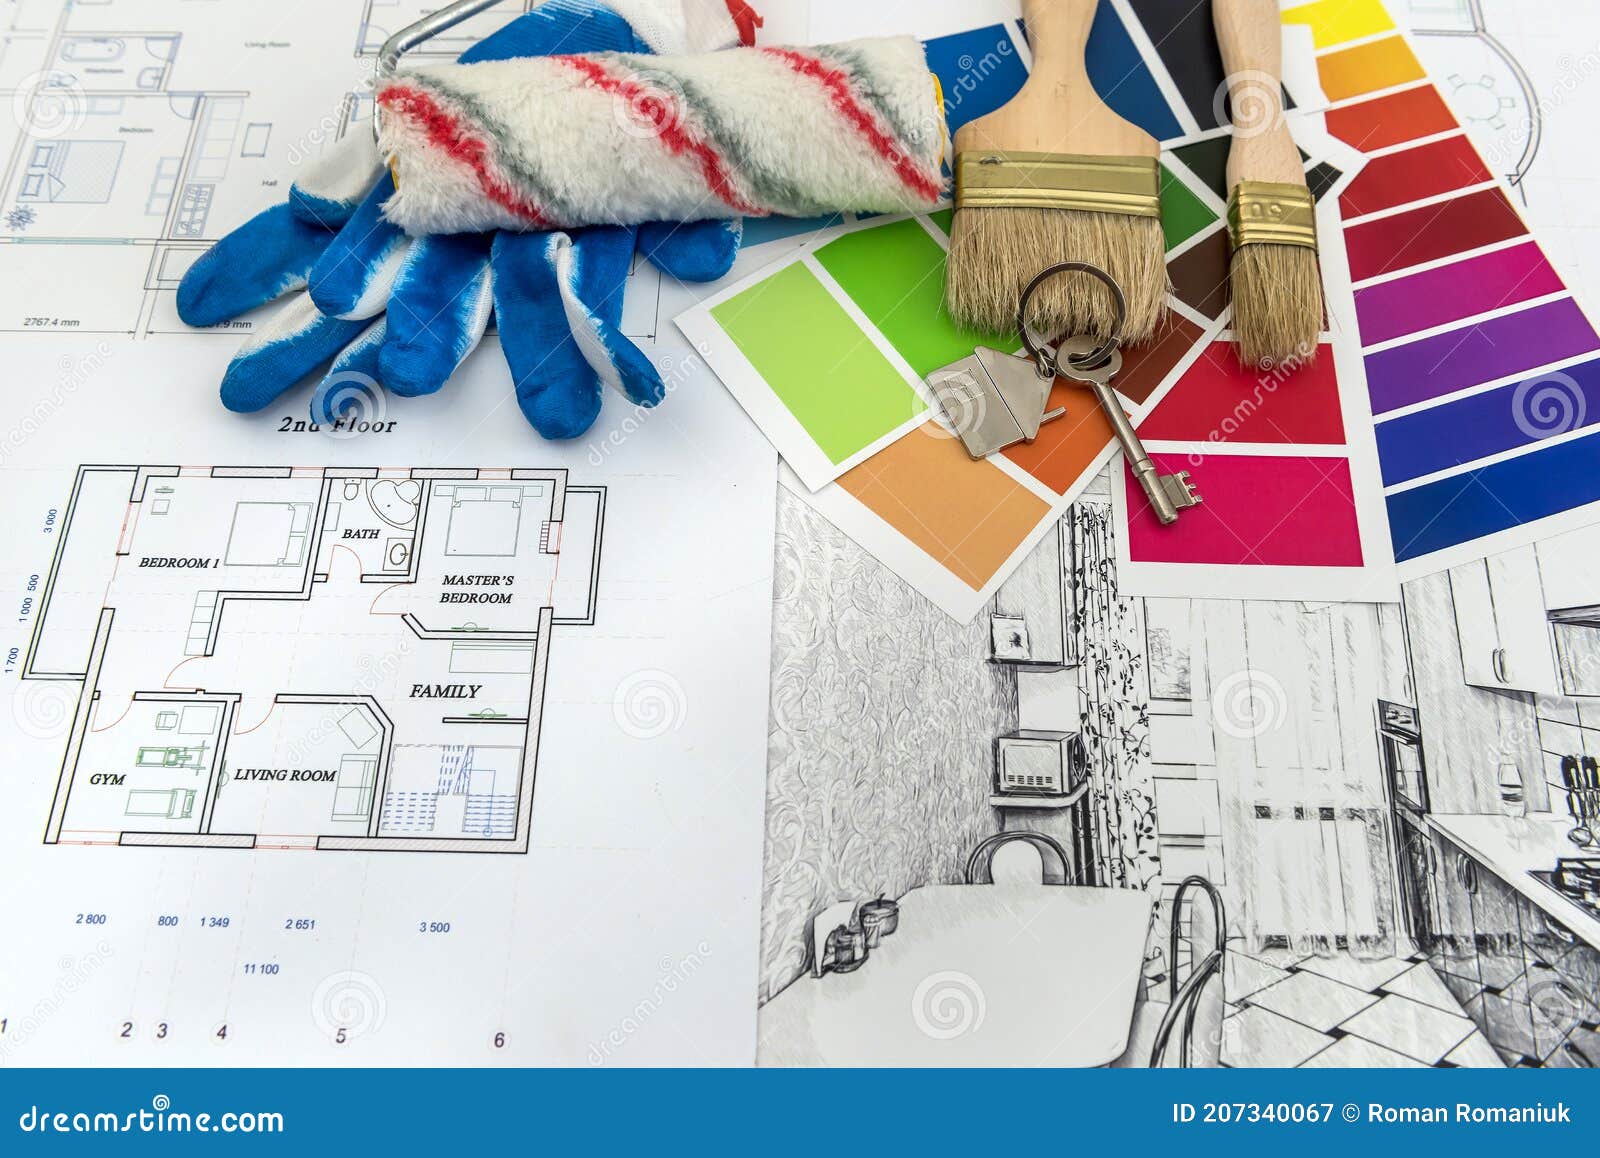 architect drawing of modern apartament blueprints with color paper material sample on creative desk